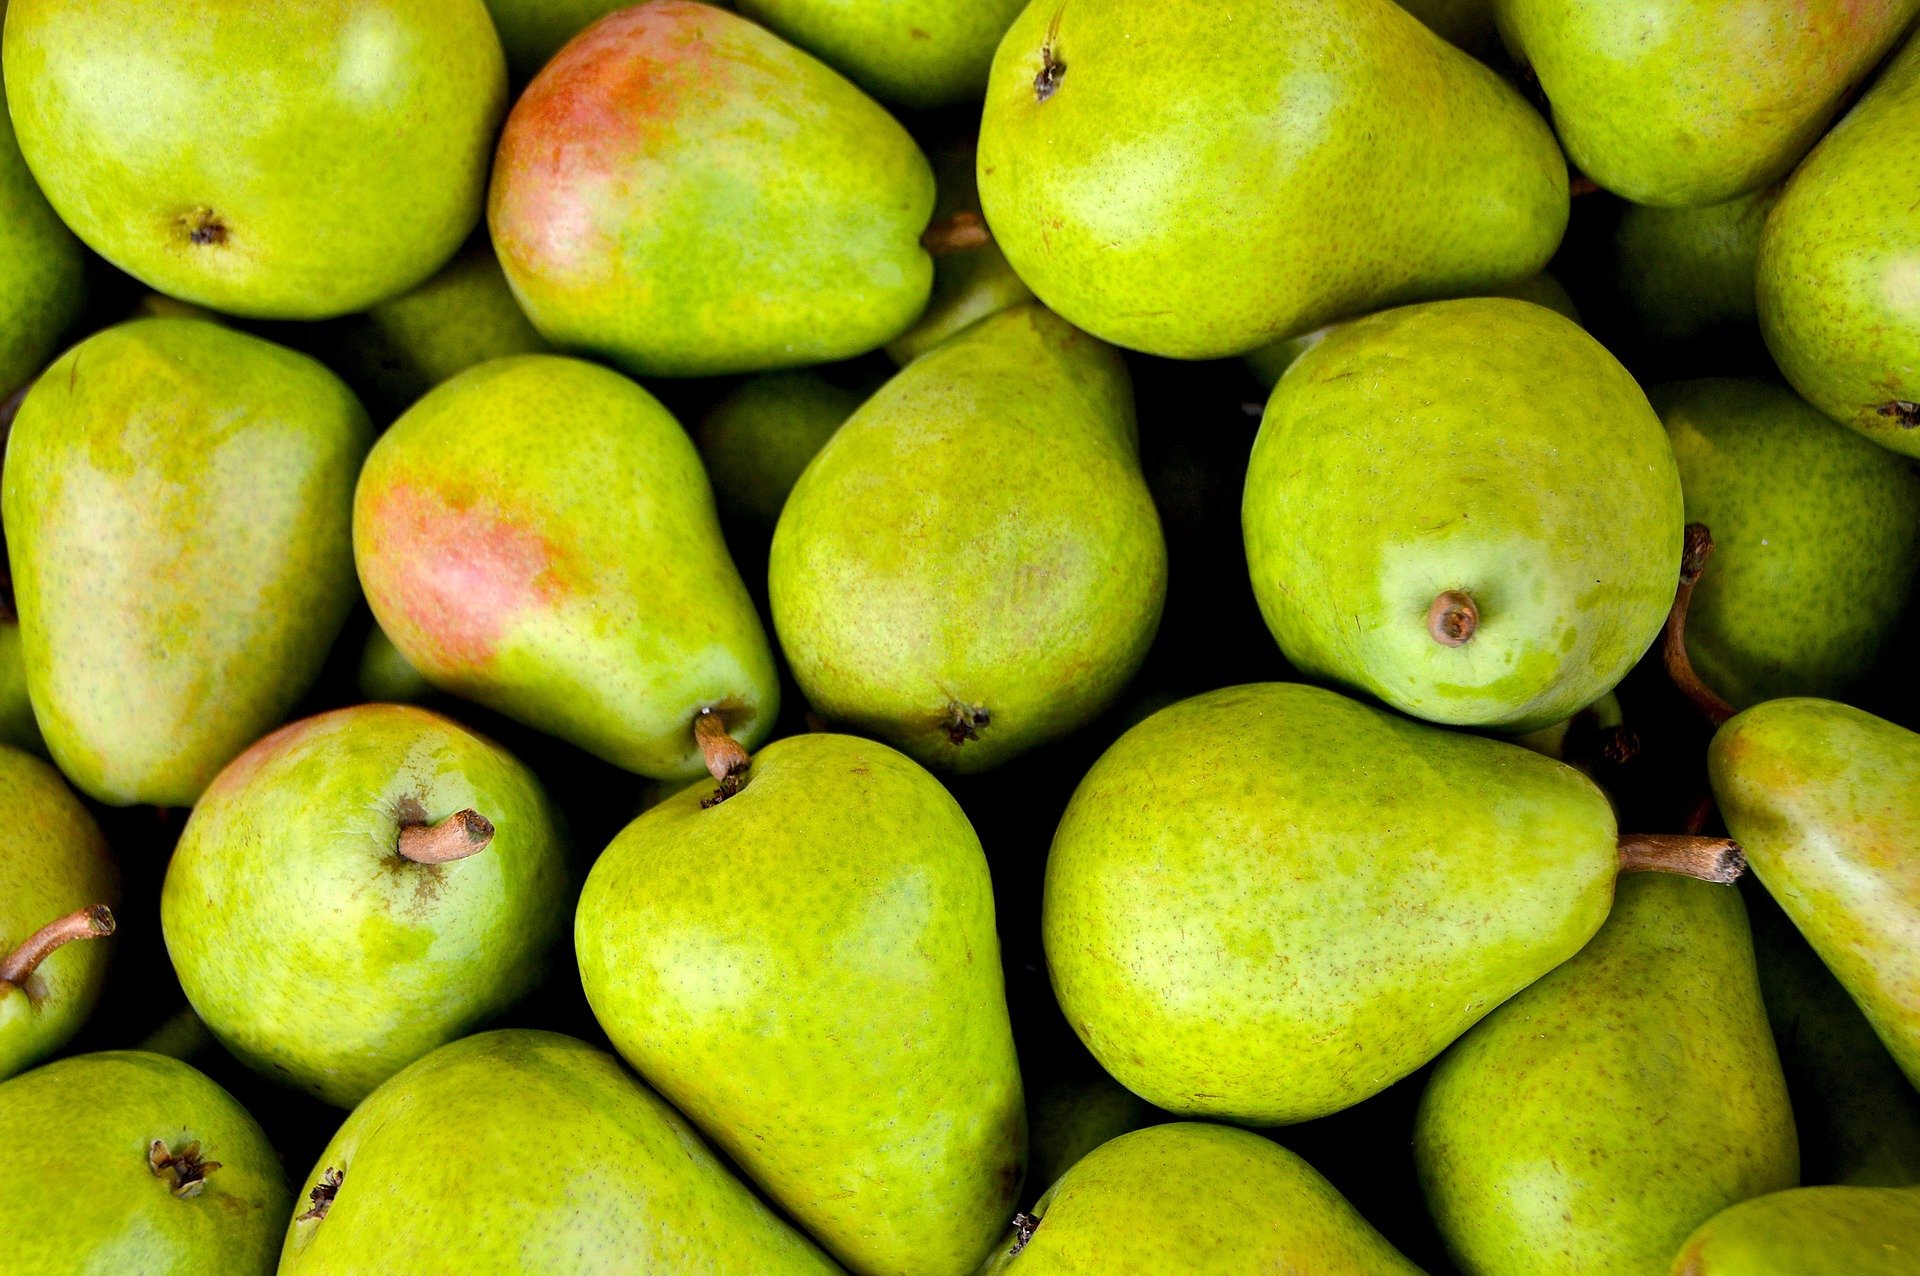 Organic Pears: A Bite into Health and Flavor!